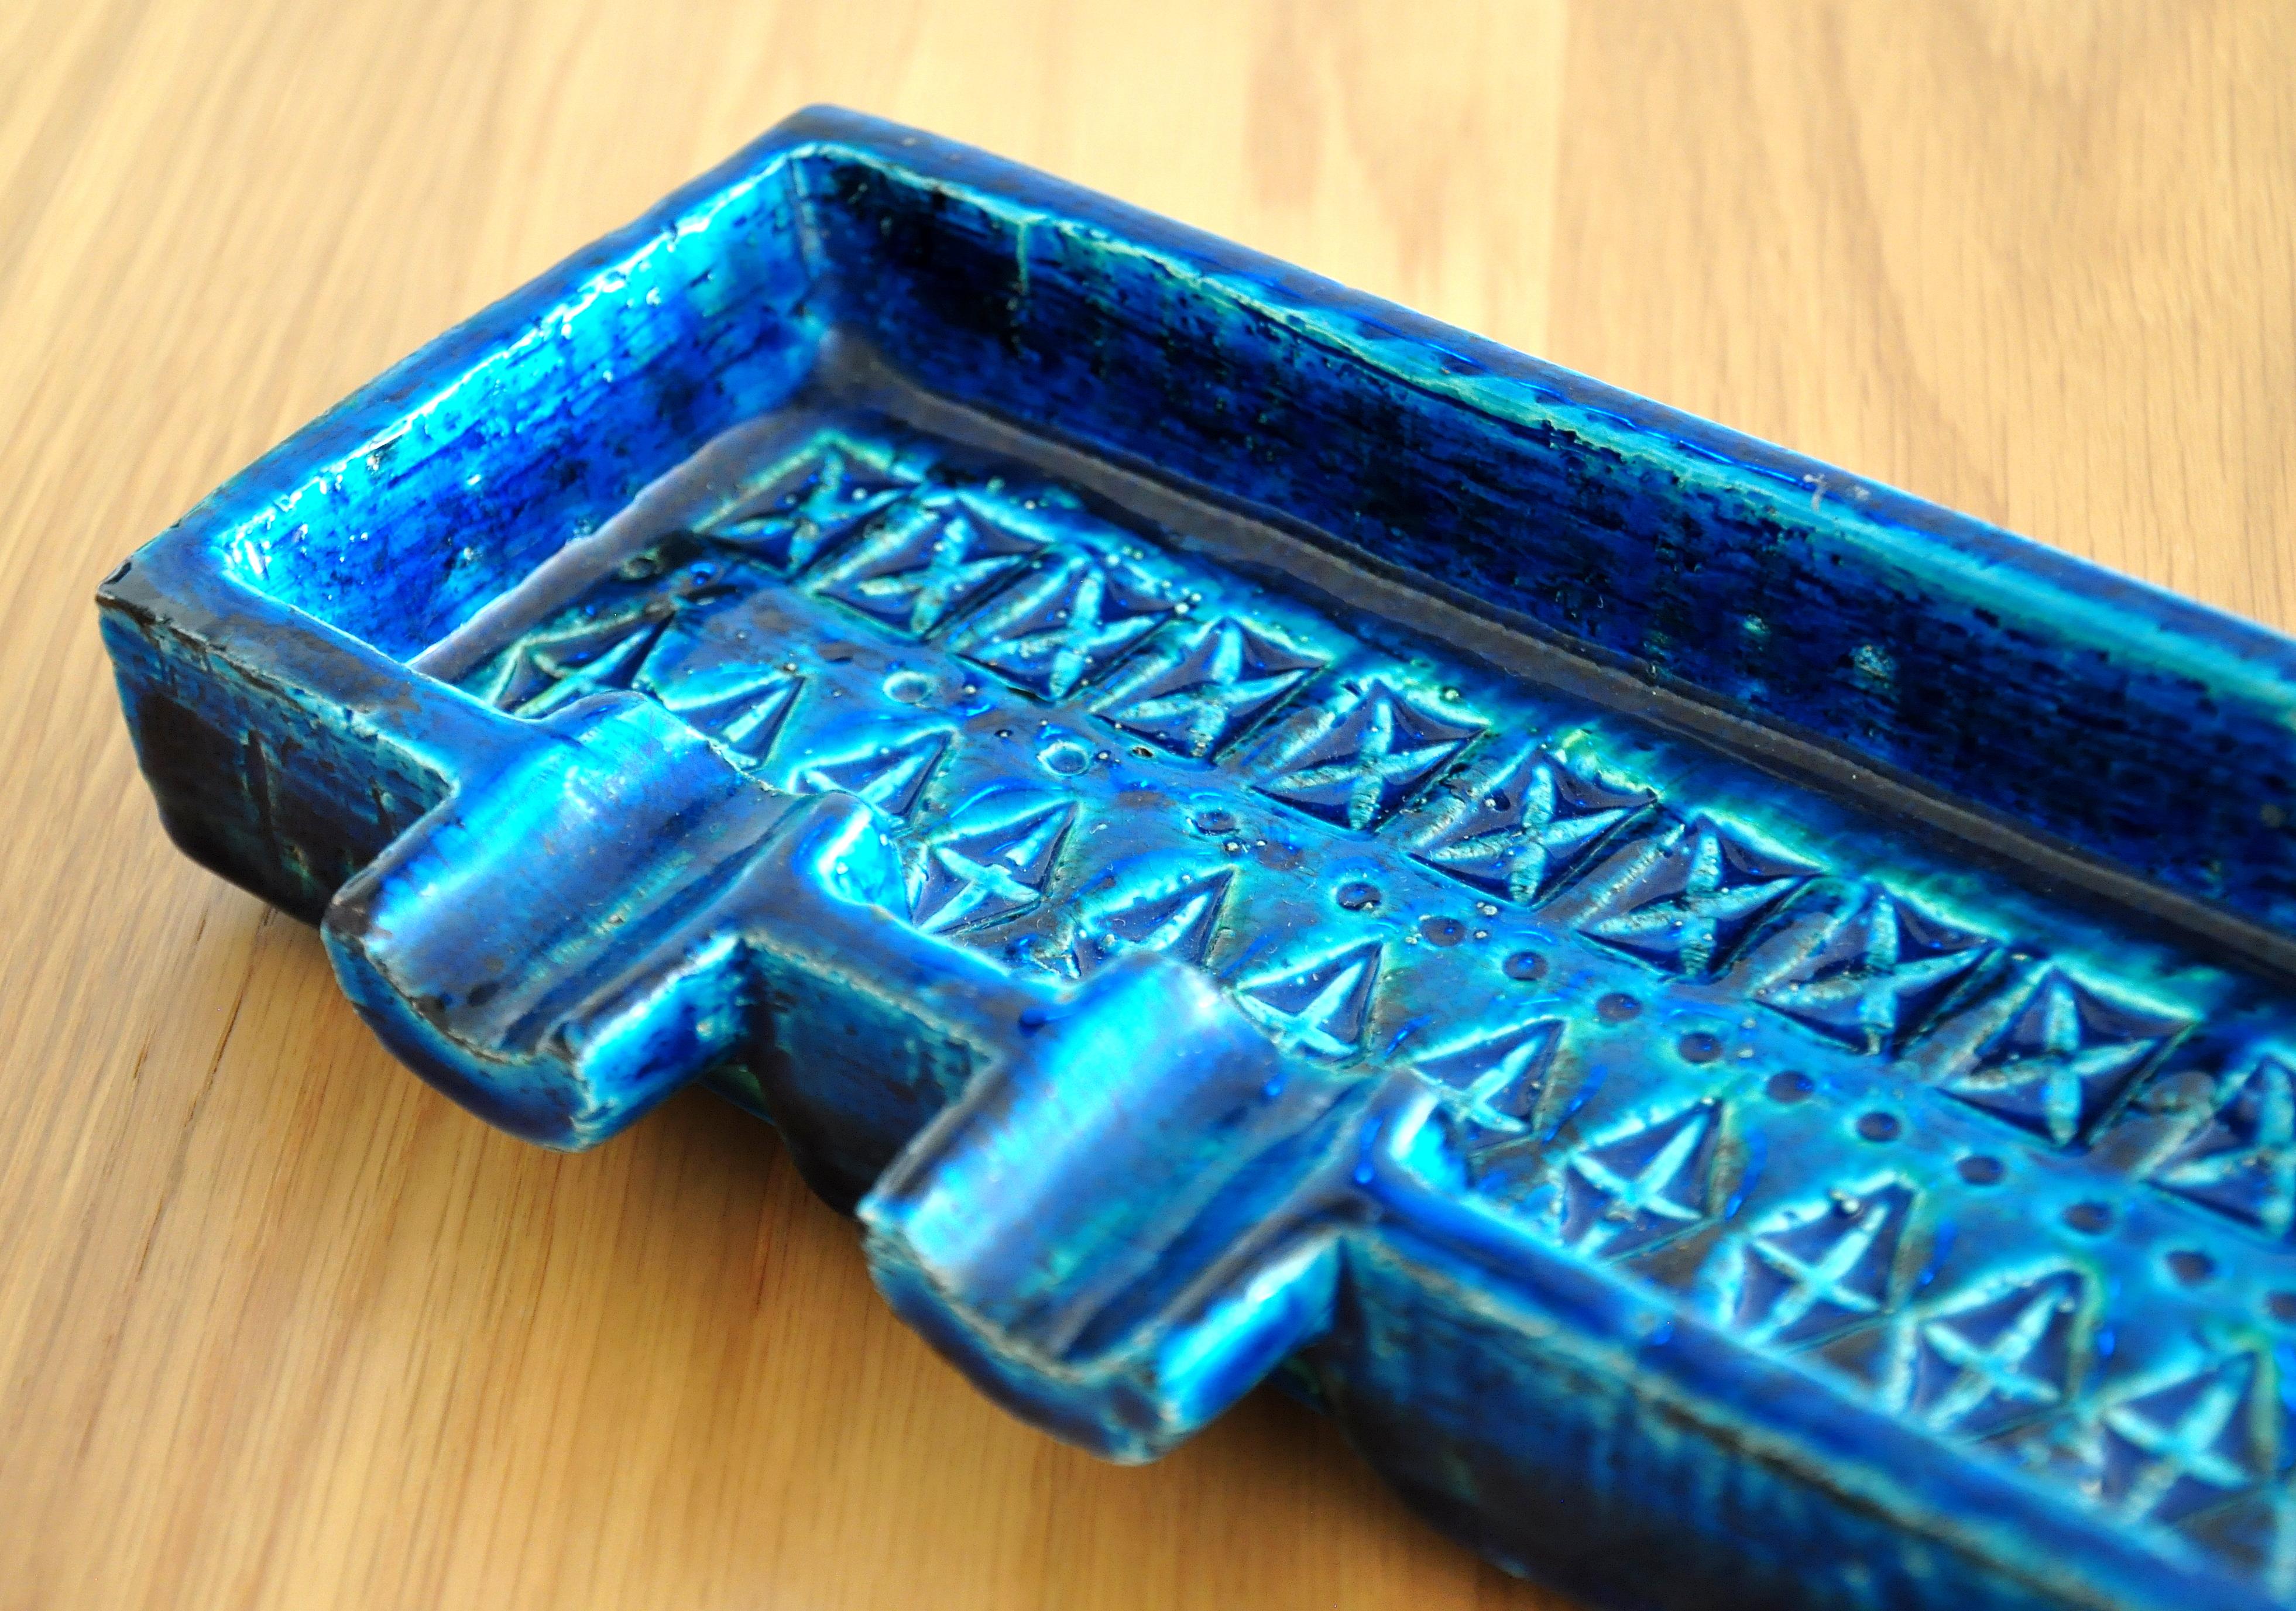 Mid-Century Modern Rimini Blu Catchall Ashtray by Aldo Londi for Bitossi, Made in Italy For Sale